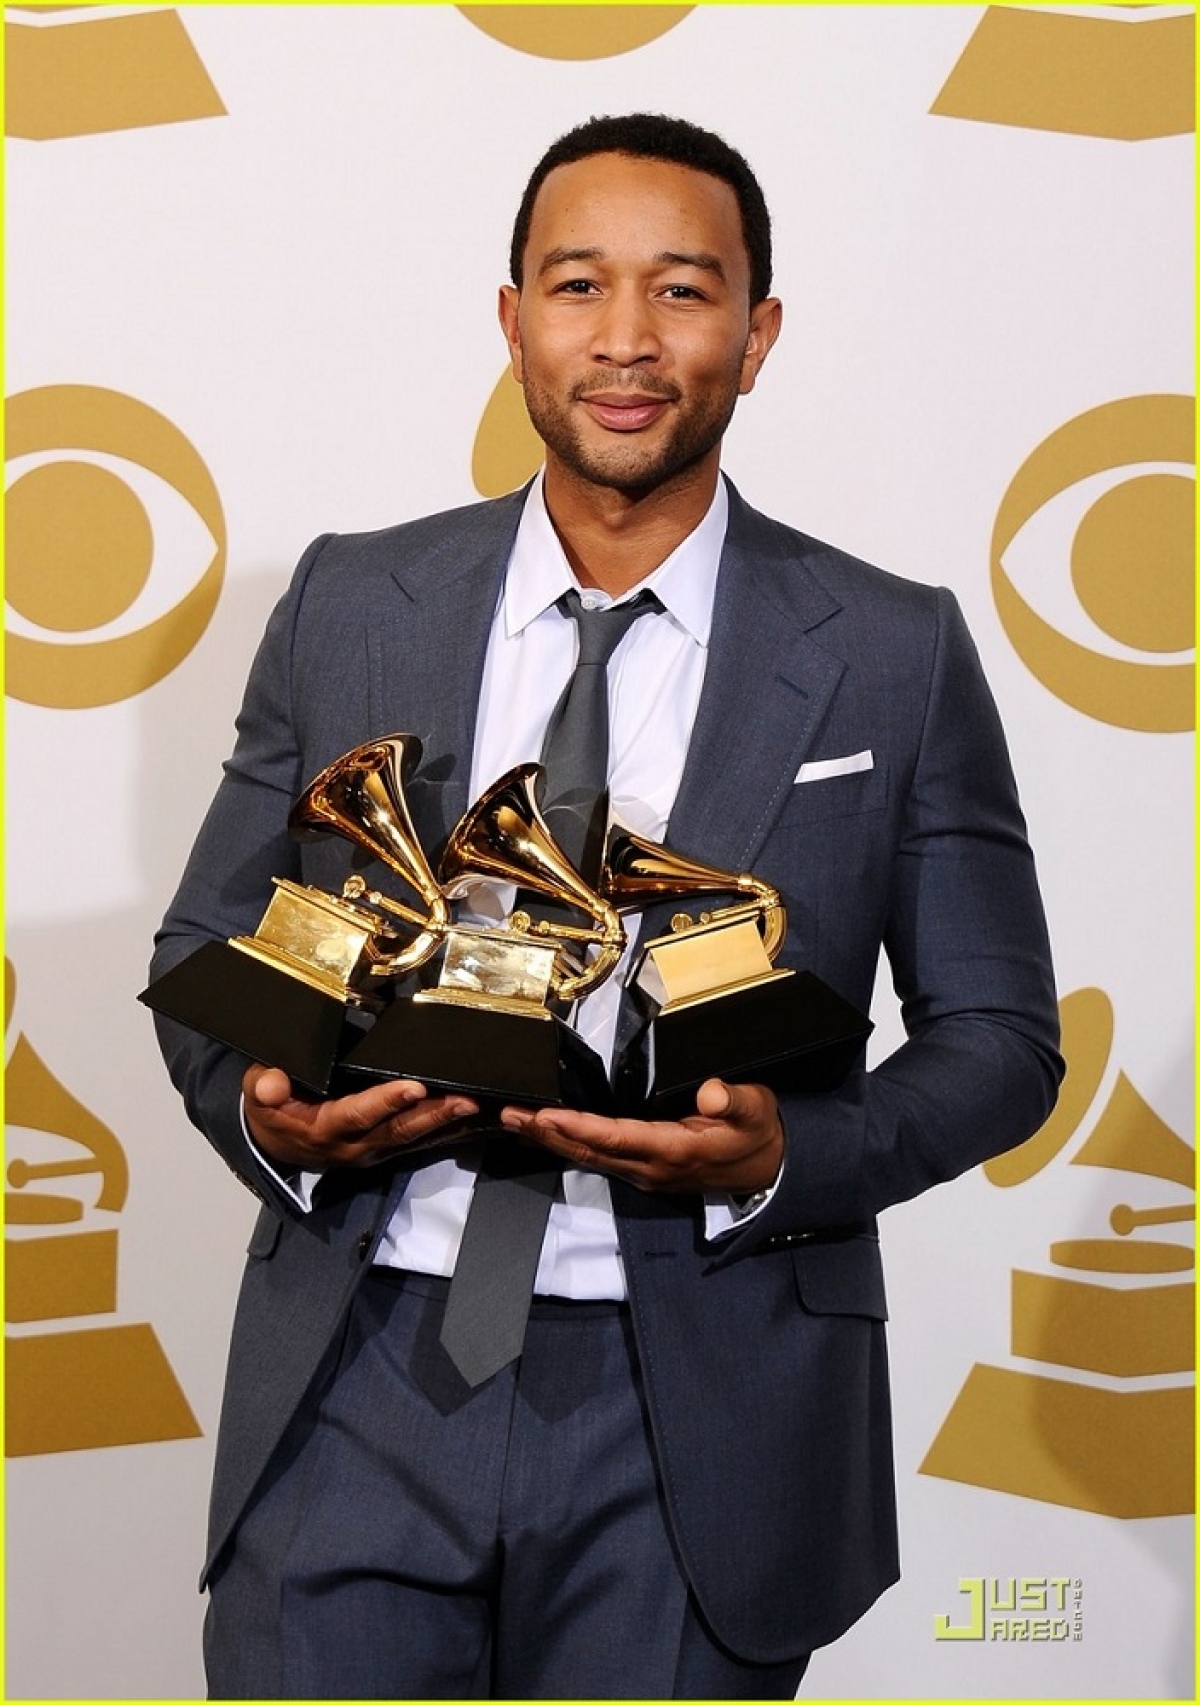 American music legend John Legend is set to perform at VinFuture Awards on January 20